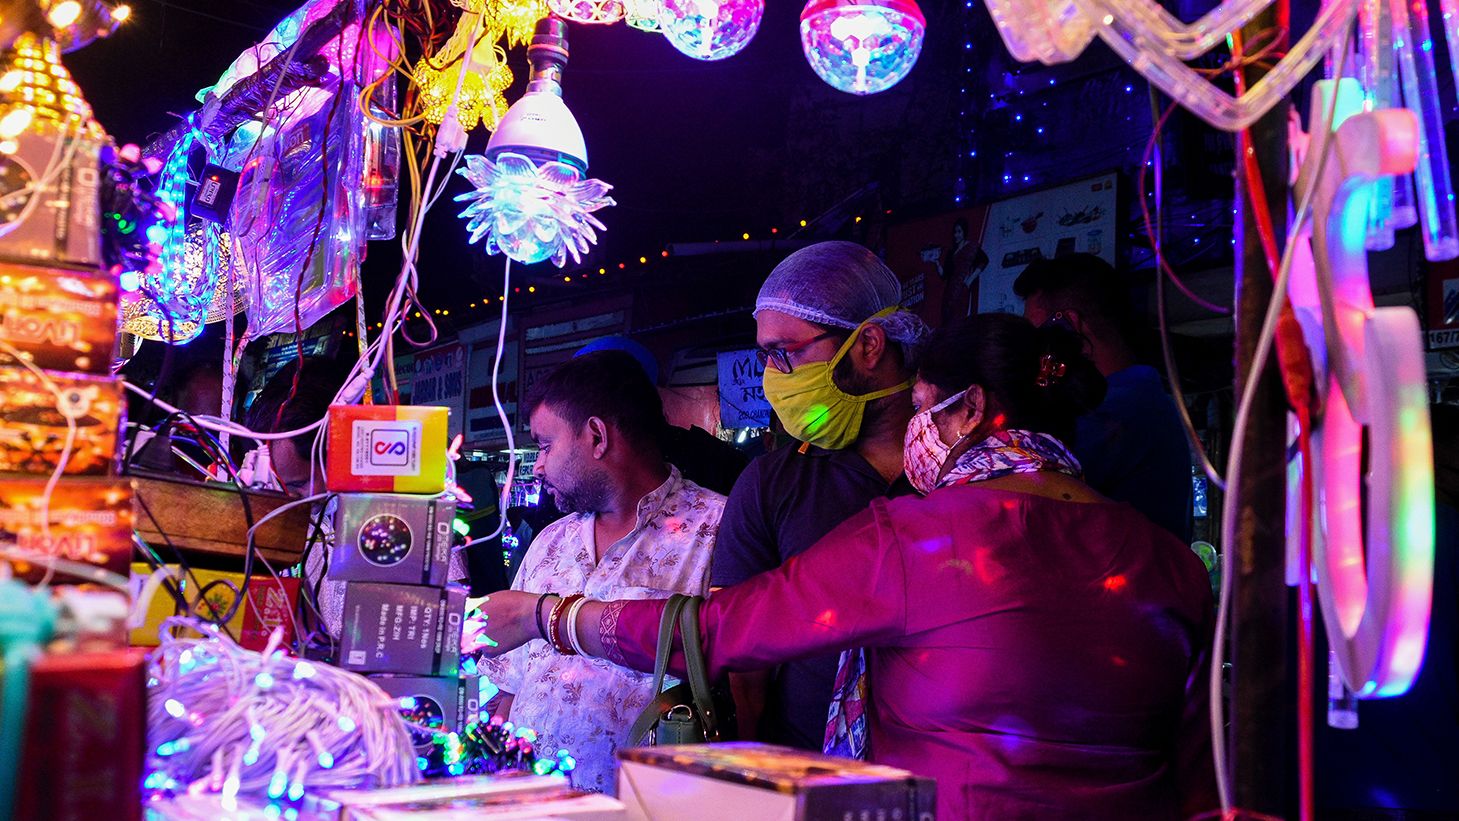 A couple shopping for decorative lights at a market in Kolkata.